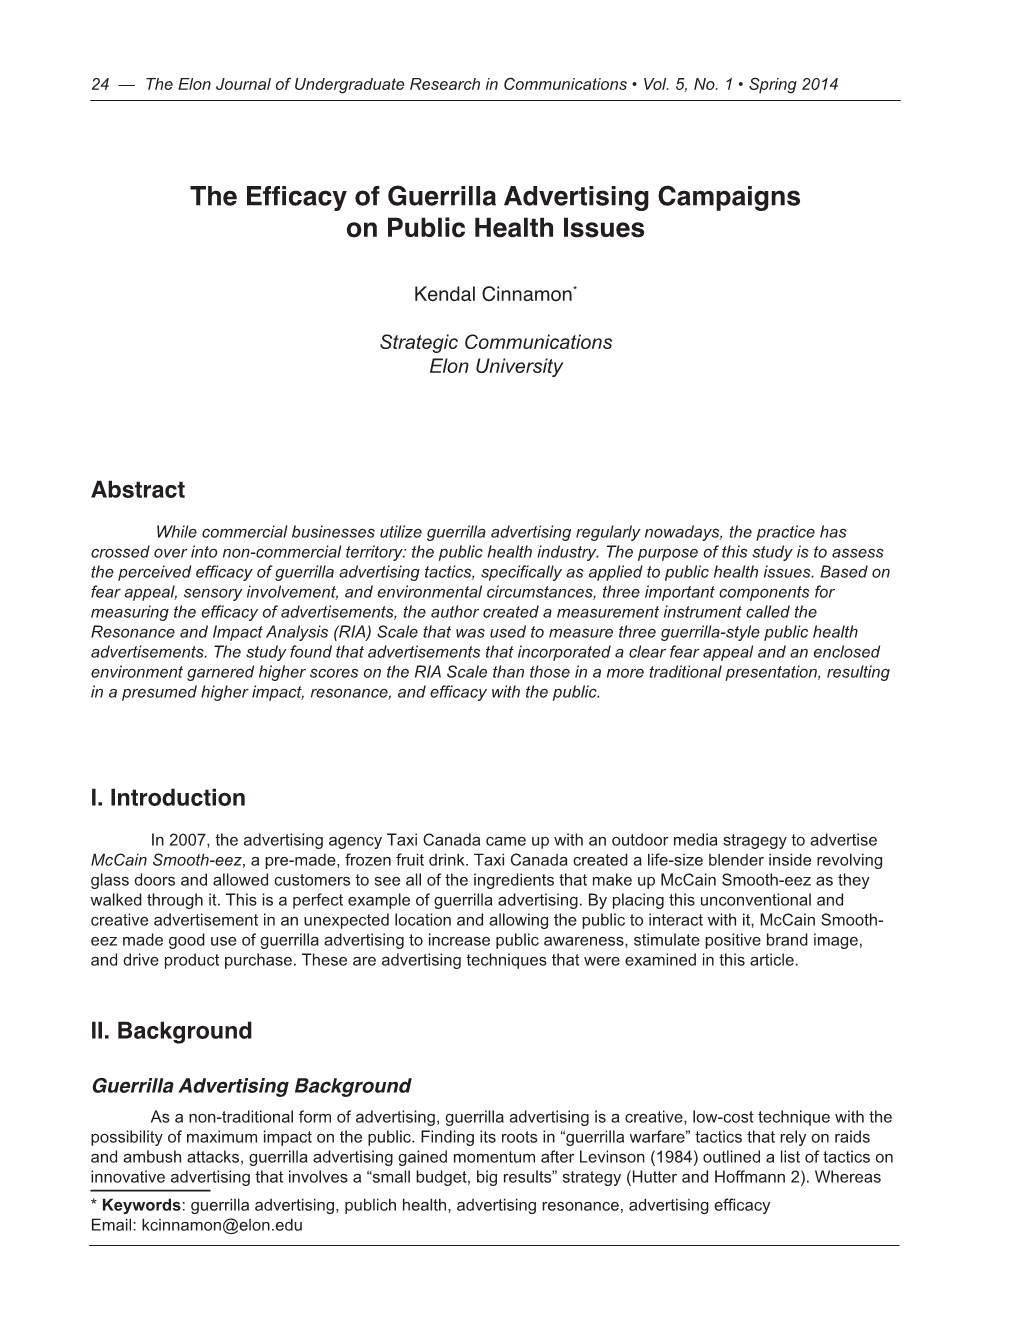 The Efficacy of Guerrilla Advertising Campaigns on Public Health Issues